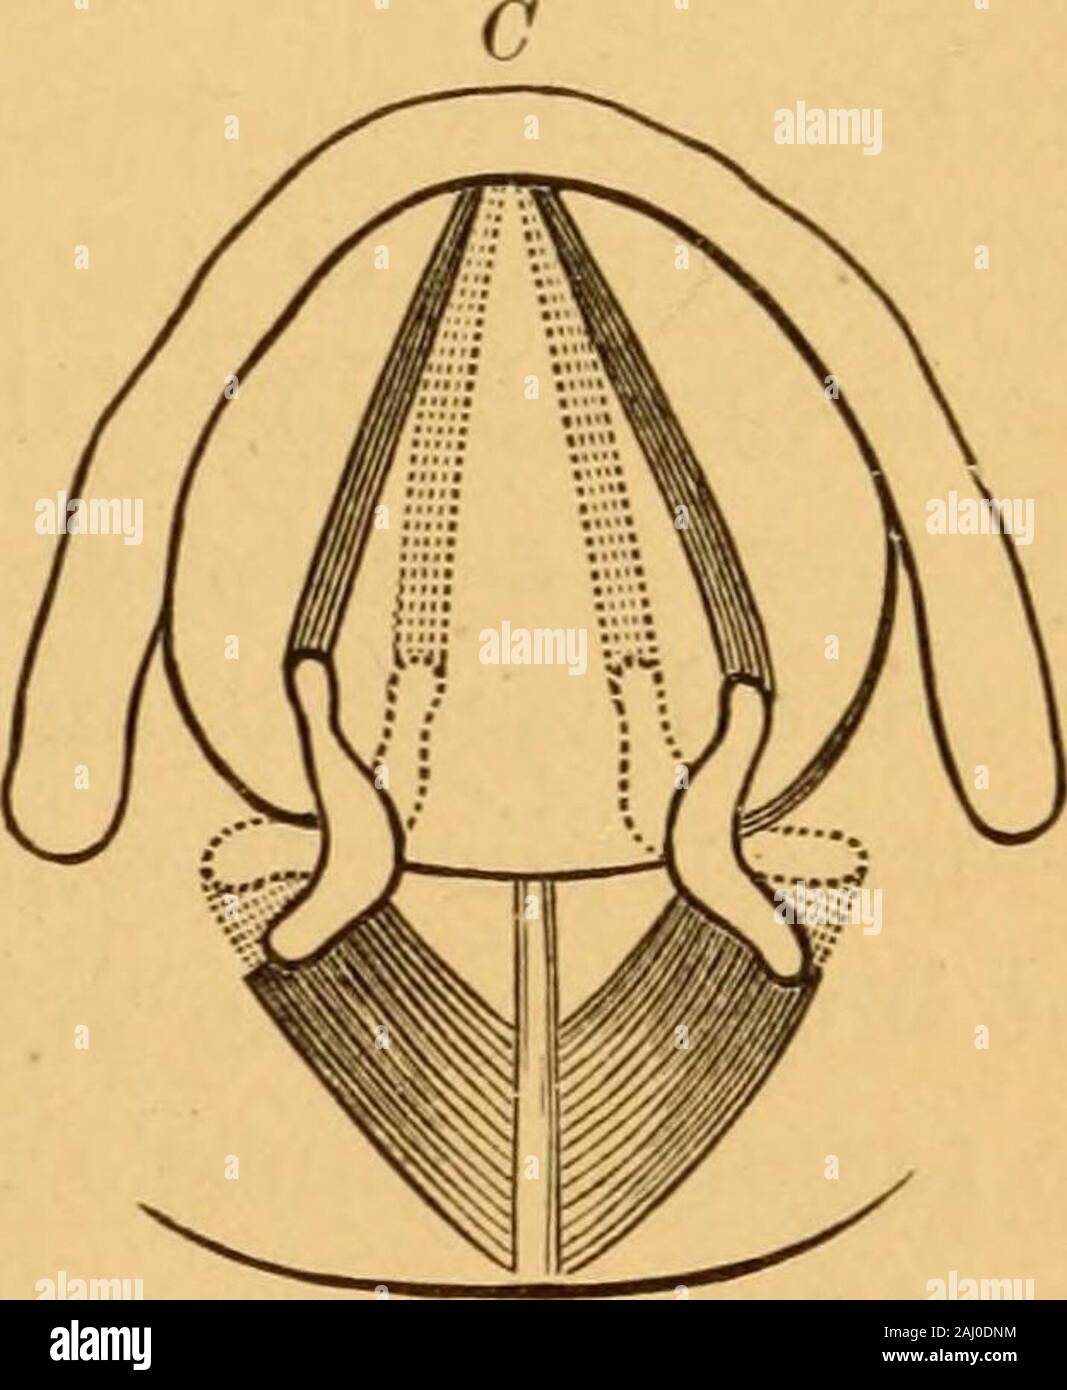 A manual of diseases of the nose and throat . Diagrammatic representation of the action of the laryngeal muscles upon the arytenoid cartilages and vocal cords. (Schroetter.) A. Action of thyro-arytenoidei externi. B. Action of arytenoideus. C. Action of crico-arytenoidei postici. The thyro-arytenoidei interni relax the cords; and theary-epiglottici, when contracted, markedly narrow theentrance into the larynx. It must be remembered thatthis is not the glottis, for the entrance to the larynx isfrom a quarter to half an inch above the vocal cords.The mucous membrane of the larynx, except that ov Stock Photo